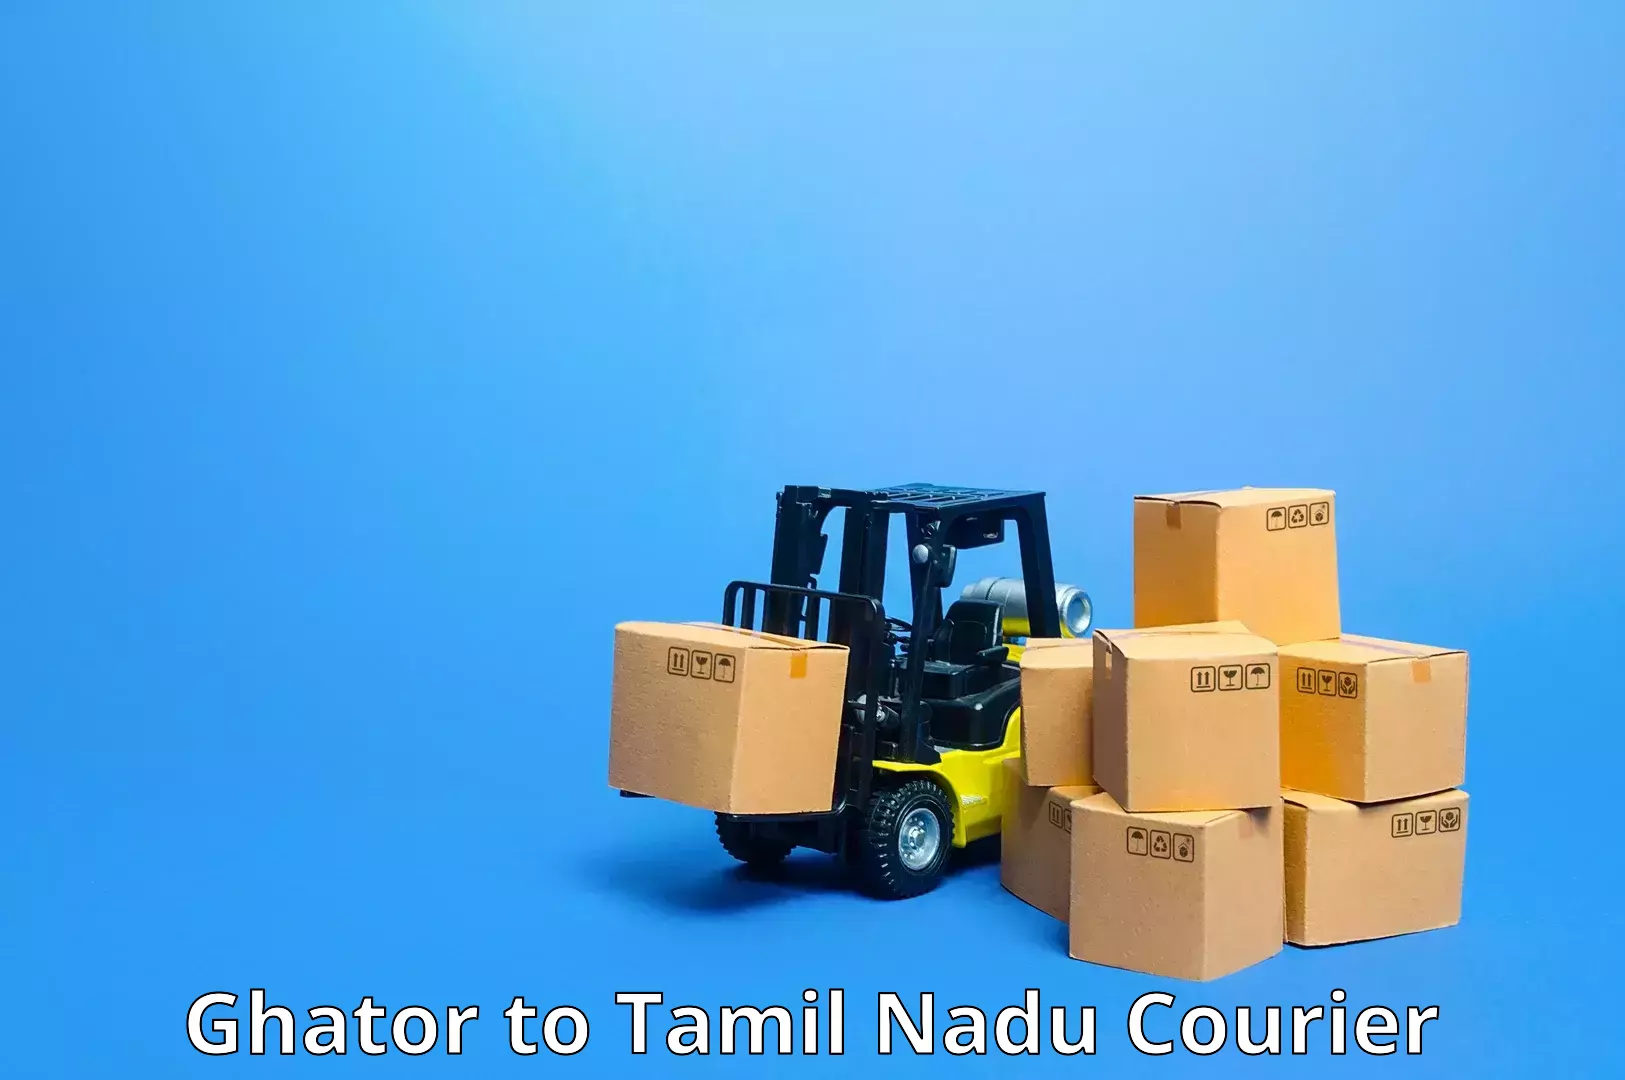 Flexible delivery schedules Ghator to Kallakurichi